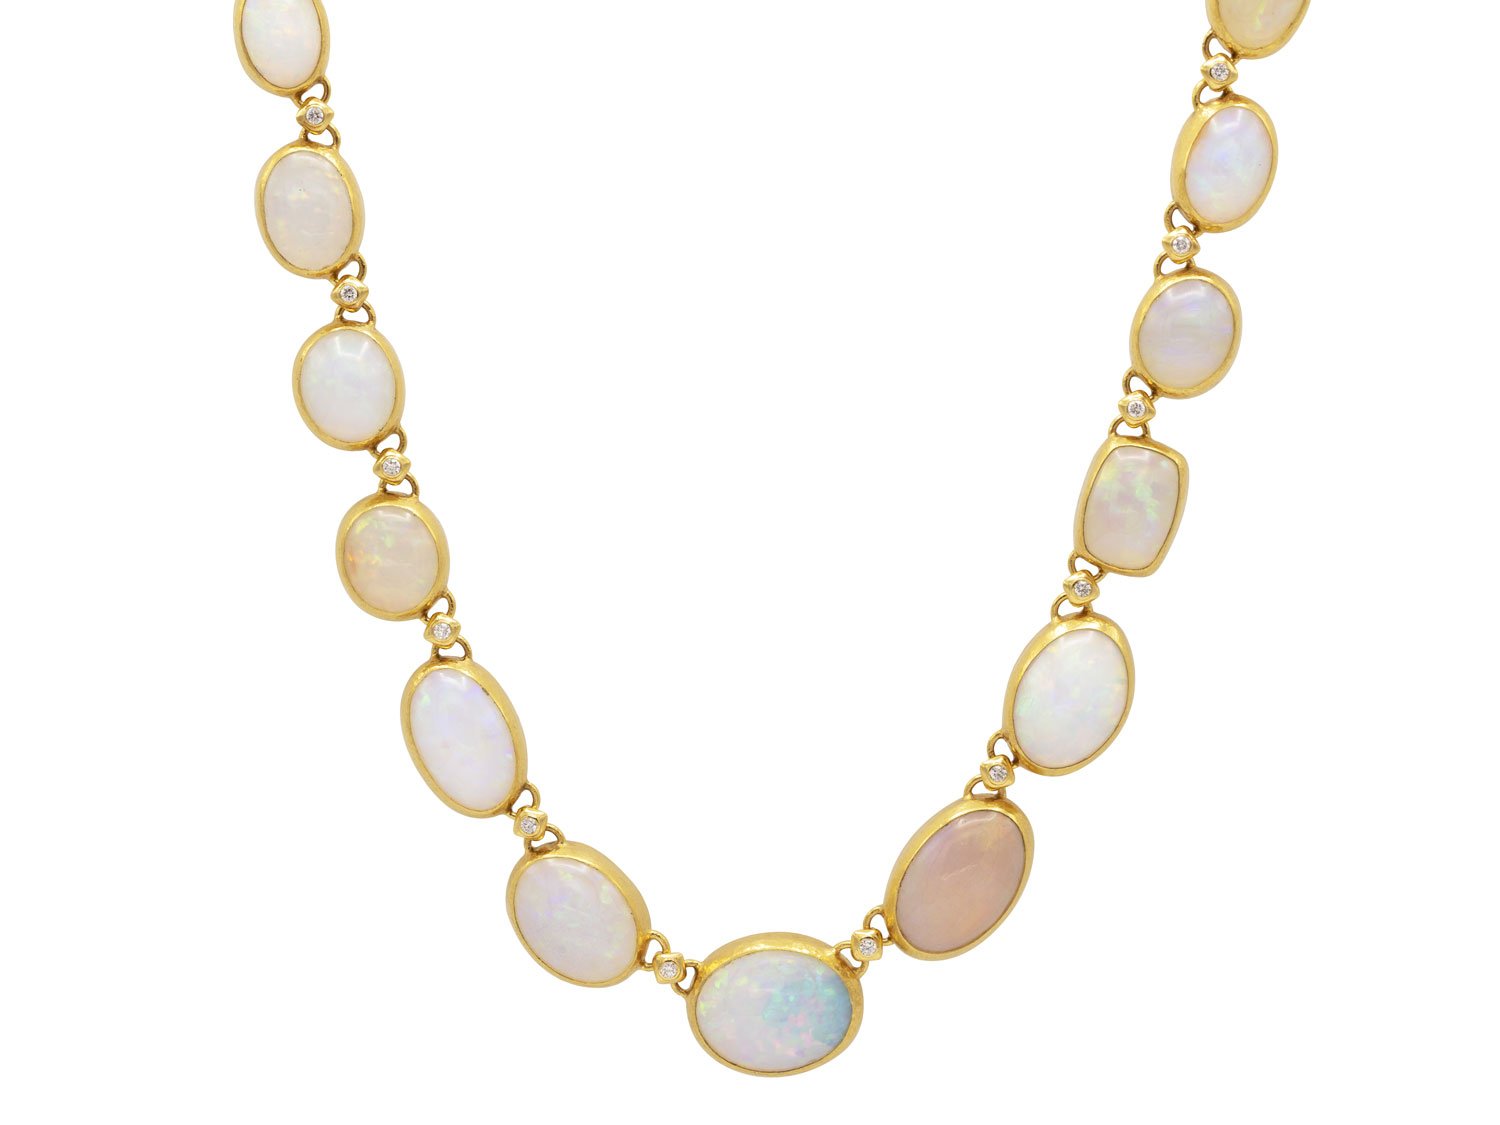 Gurhan 24kt Yellow Gold Ethiopian Opal Necklace with Diamonds